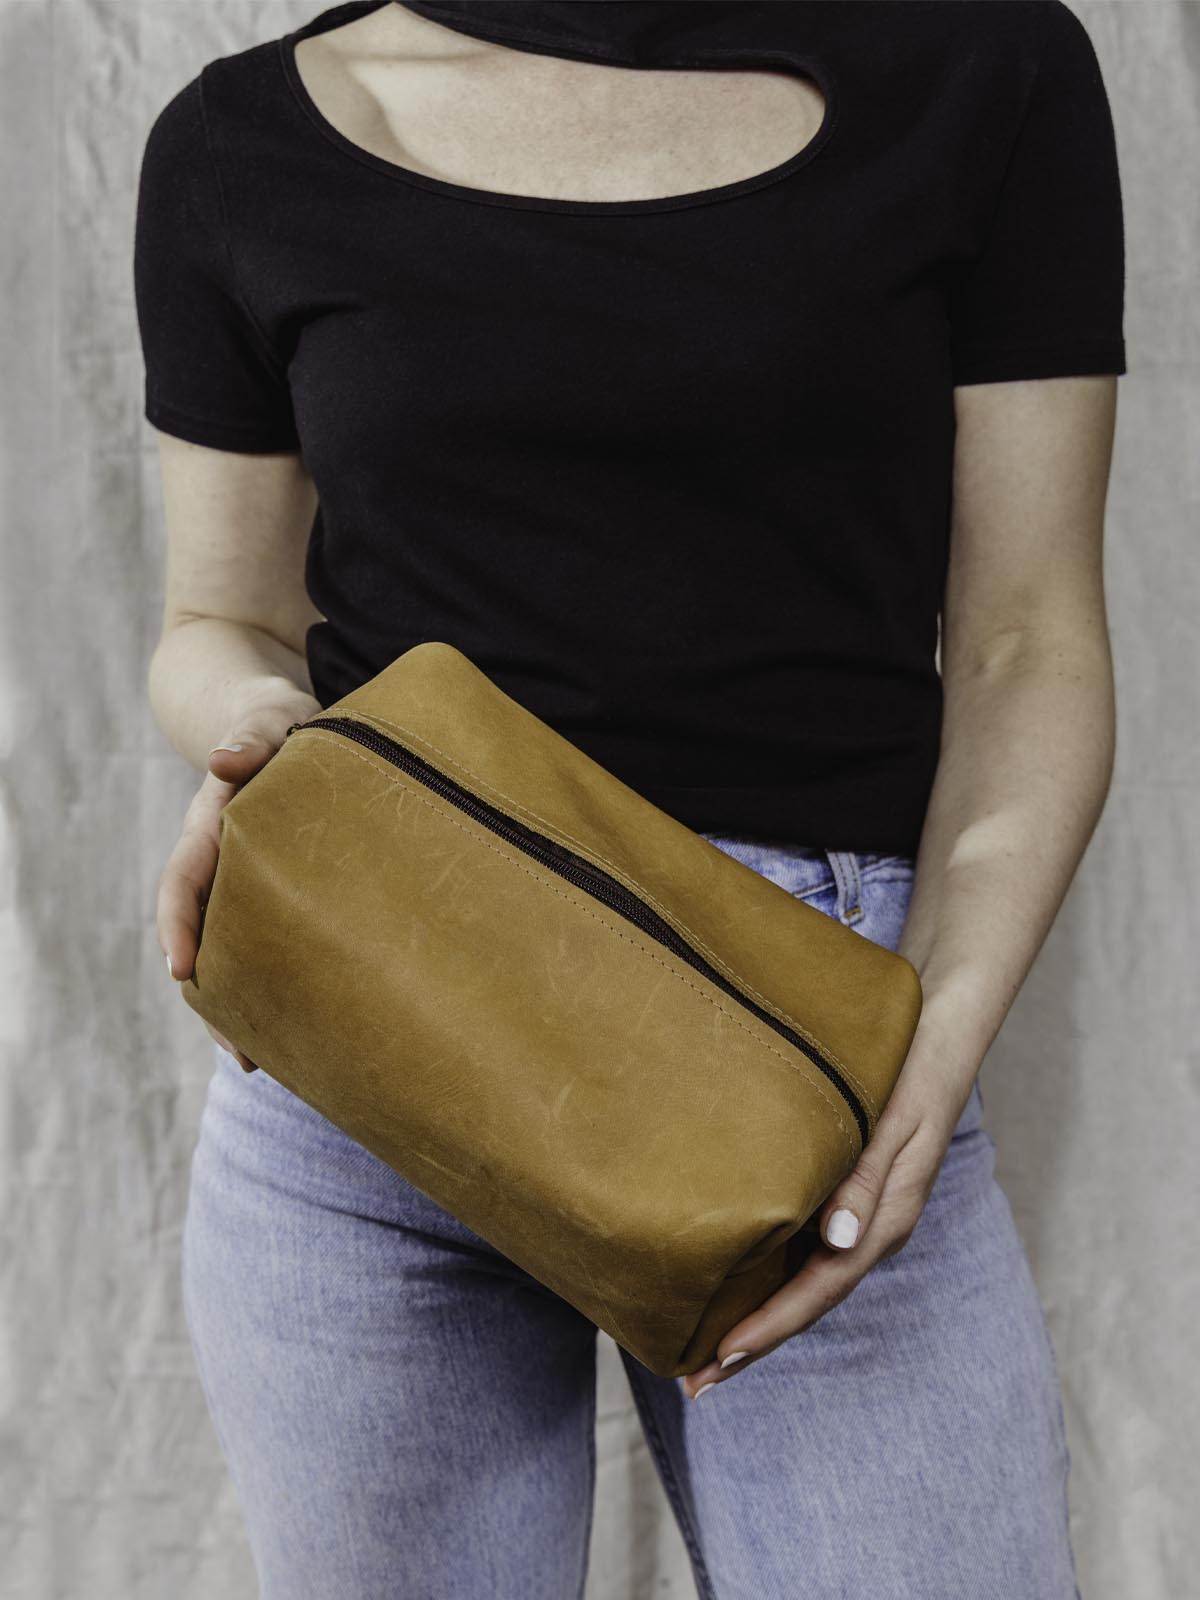 Model holding Carmel colored leather bag with zipper 